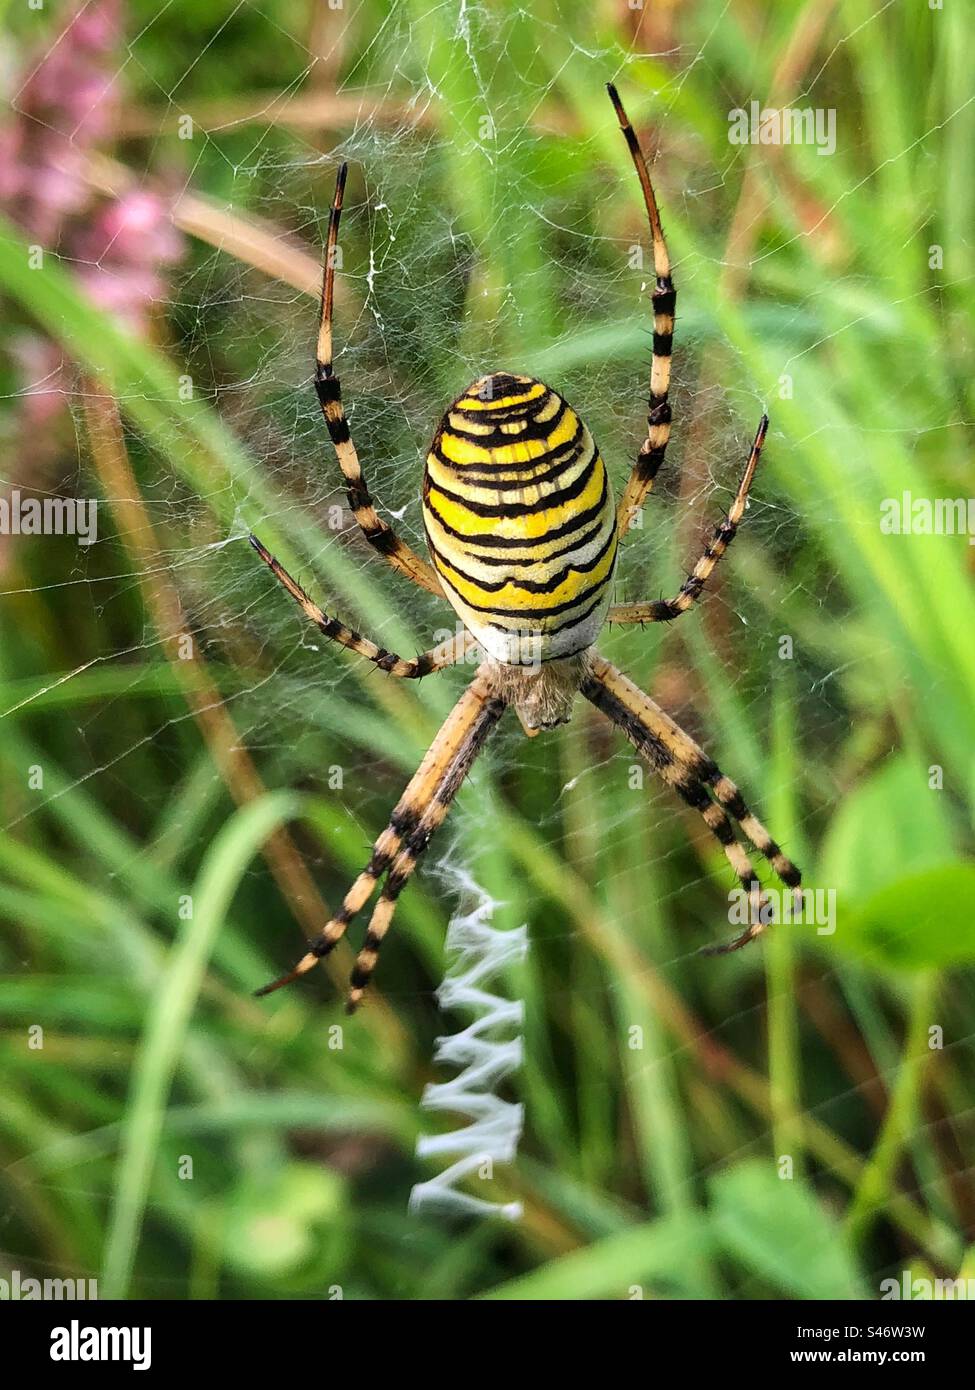 Wasp spider (Argiope bruennichi) Female waiting for prey and showing its distinctive “stabilimentum” a white zig-zag strip running down the middle of its web. Lakeside Country Park, Eastleigh, UK Stock Photo